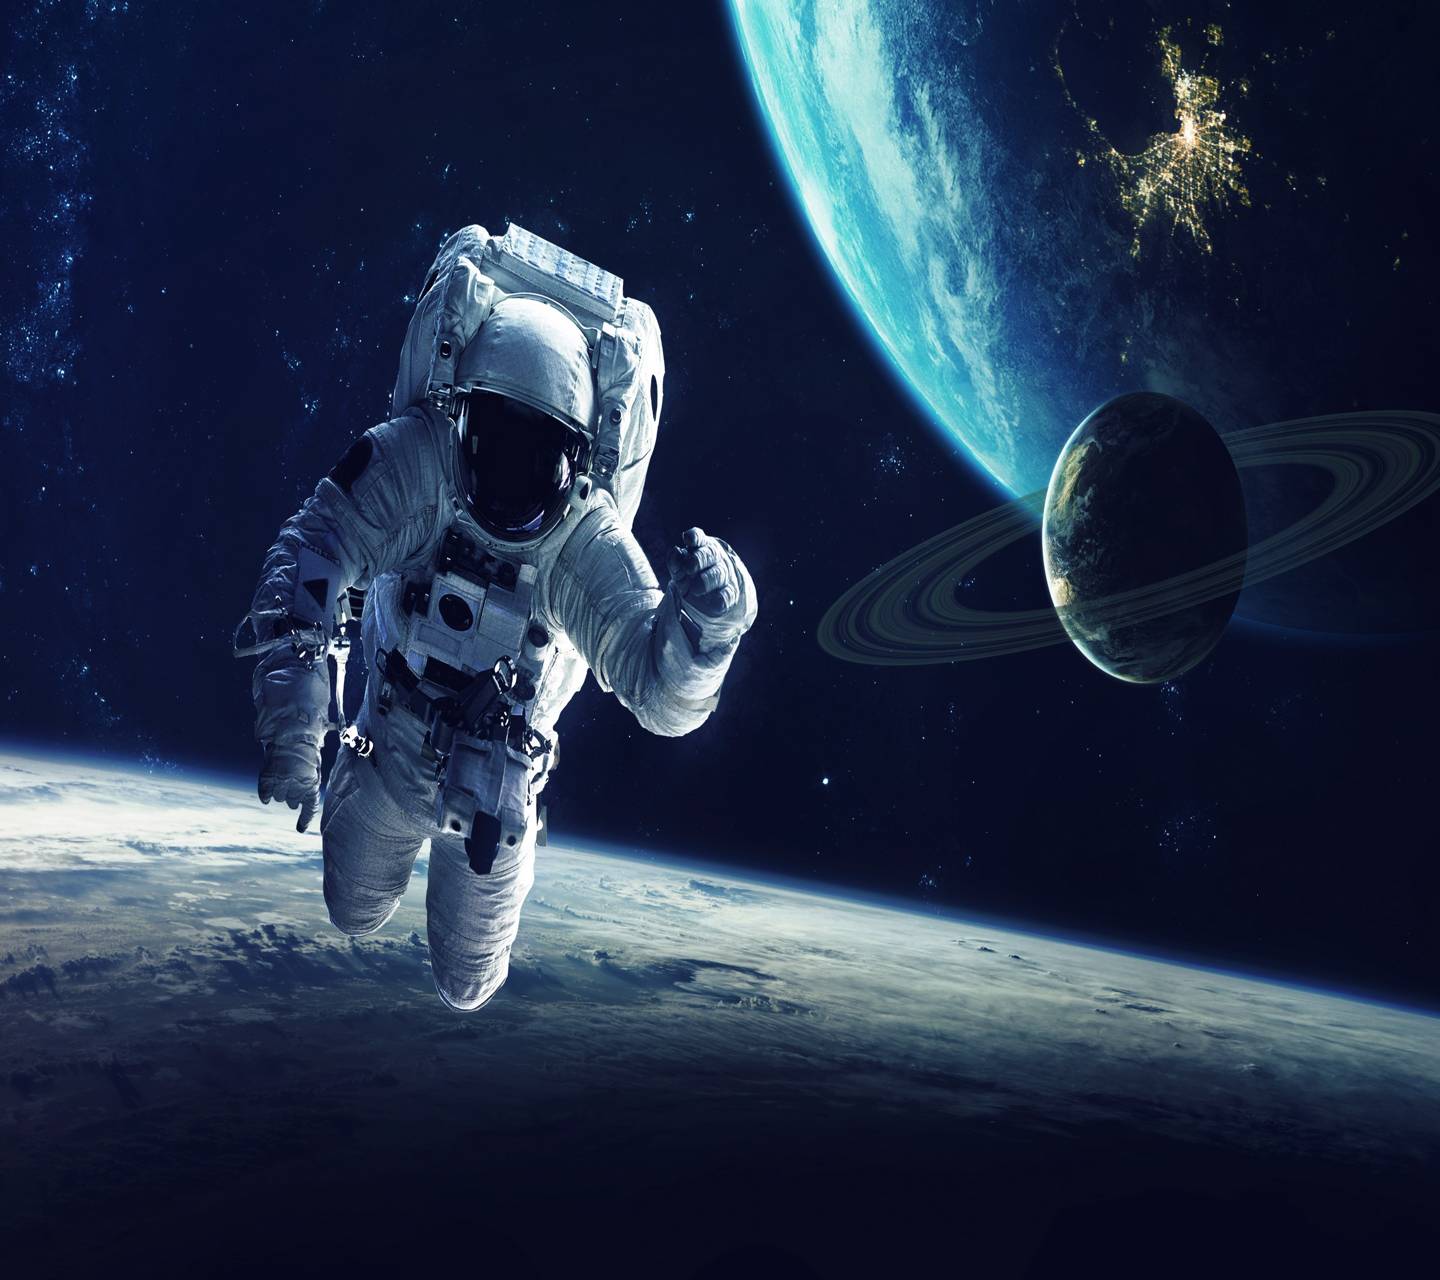 Download free astronaut wallpaper for your mobile phone